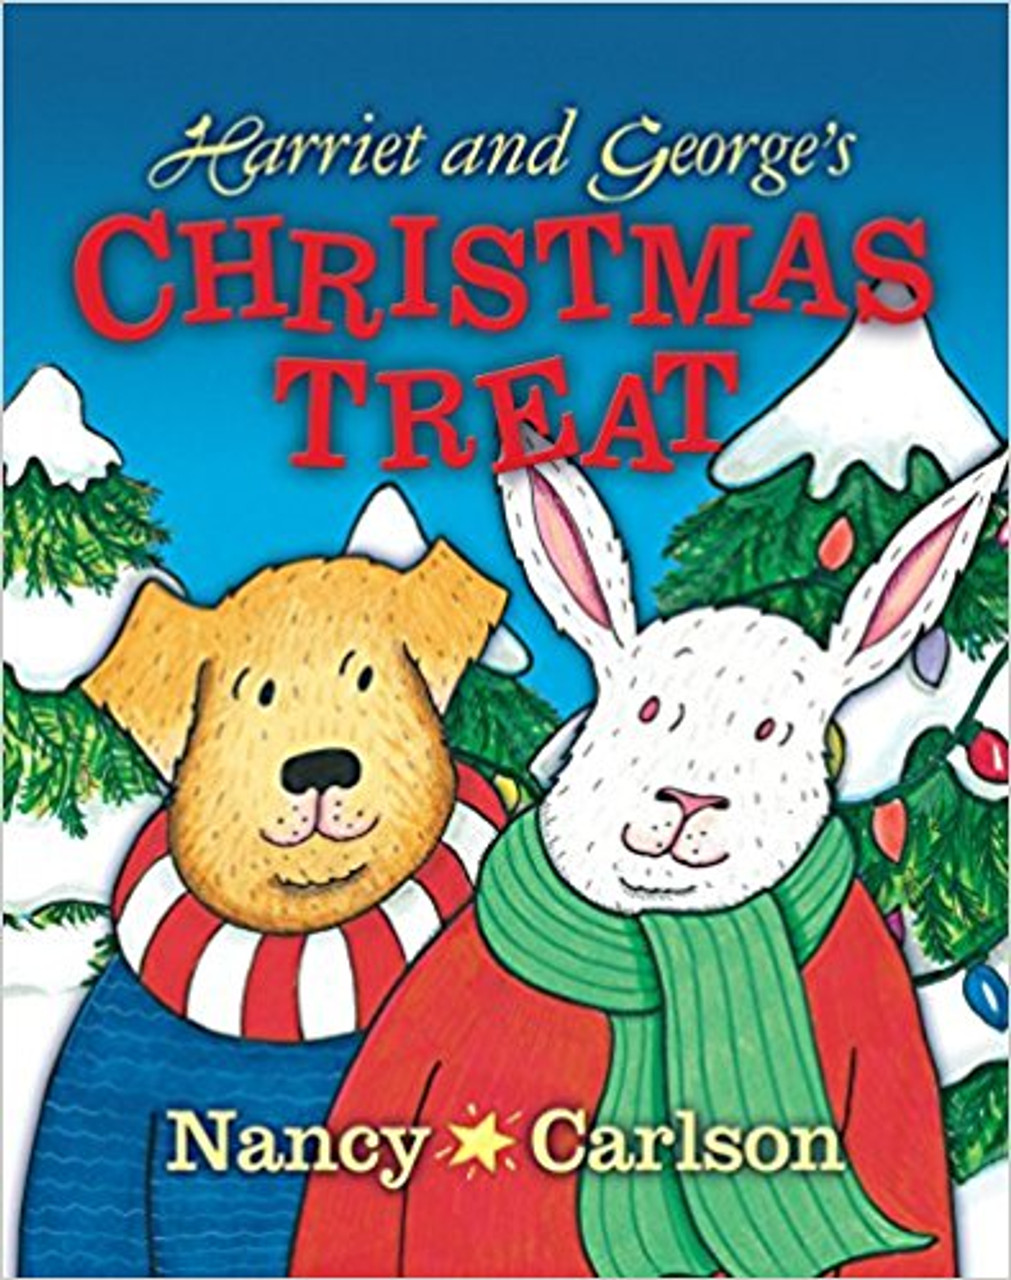 Harriet and George's Christmas Treat by Nancy Carlson